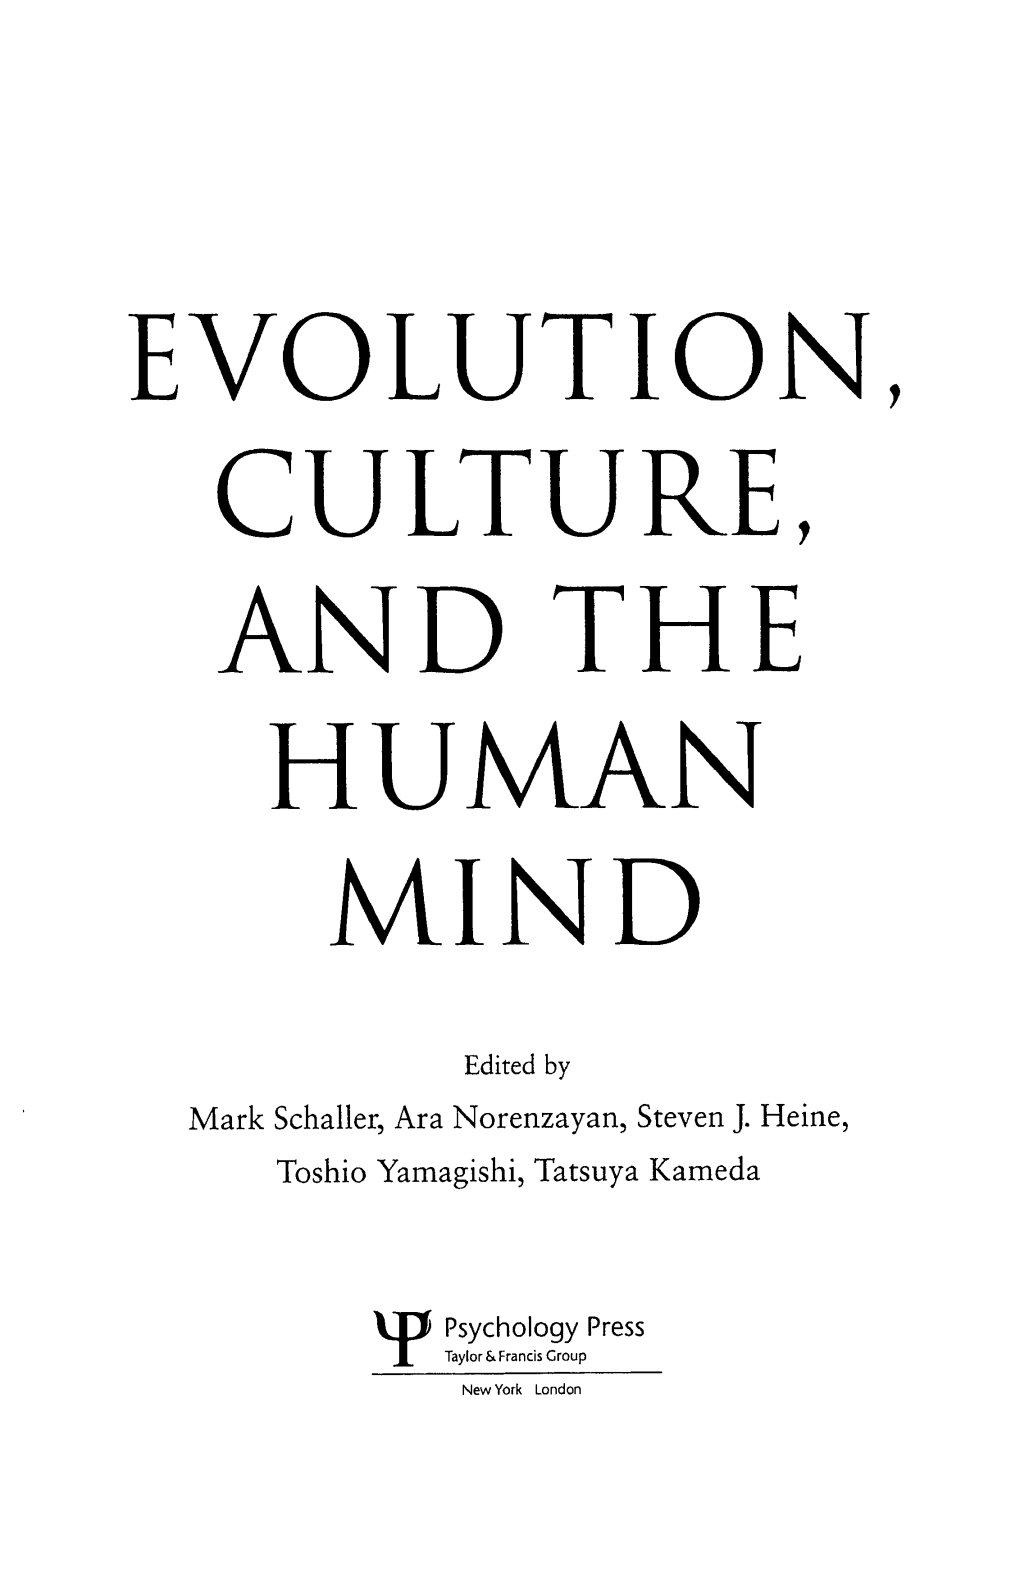 Evolution, Culture, and the Human Mind